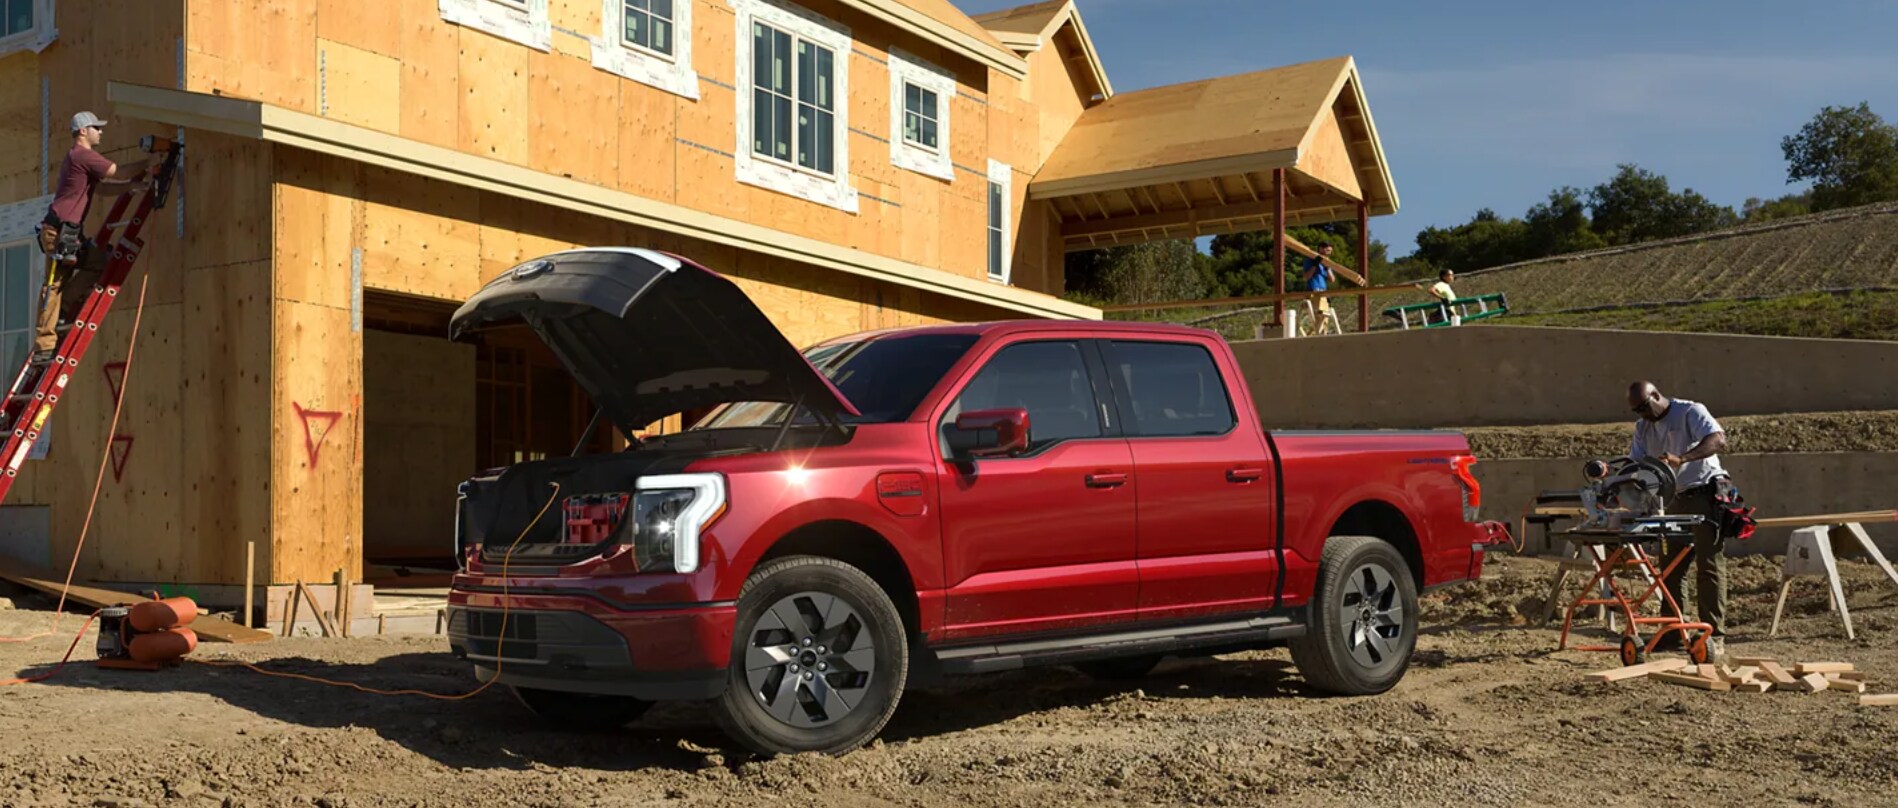 A berry colored F-150 Lightning is parked at a construction site in the
dirt with the hood open revealing a storage space and outlets being used by the
construction workers